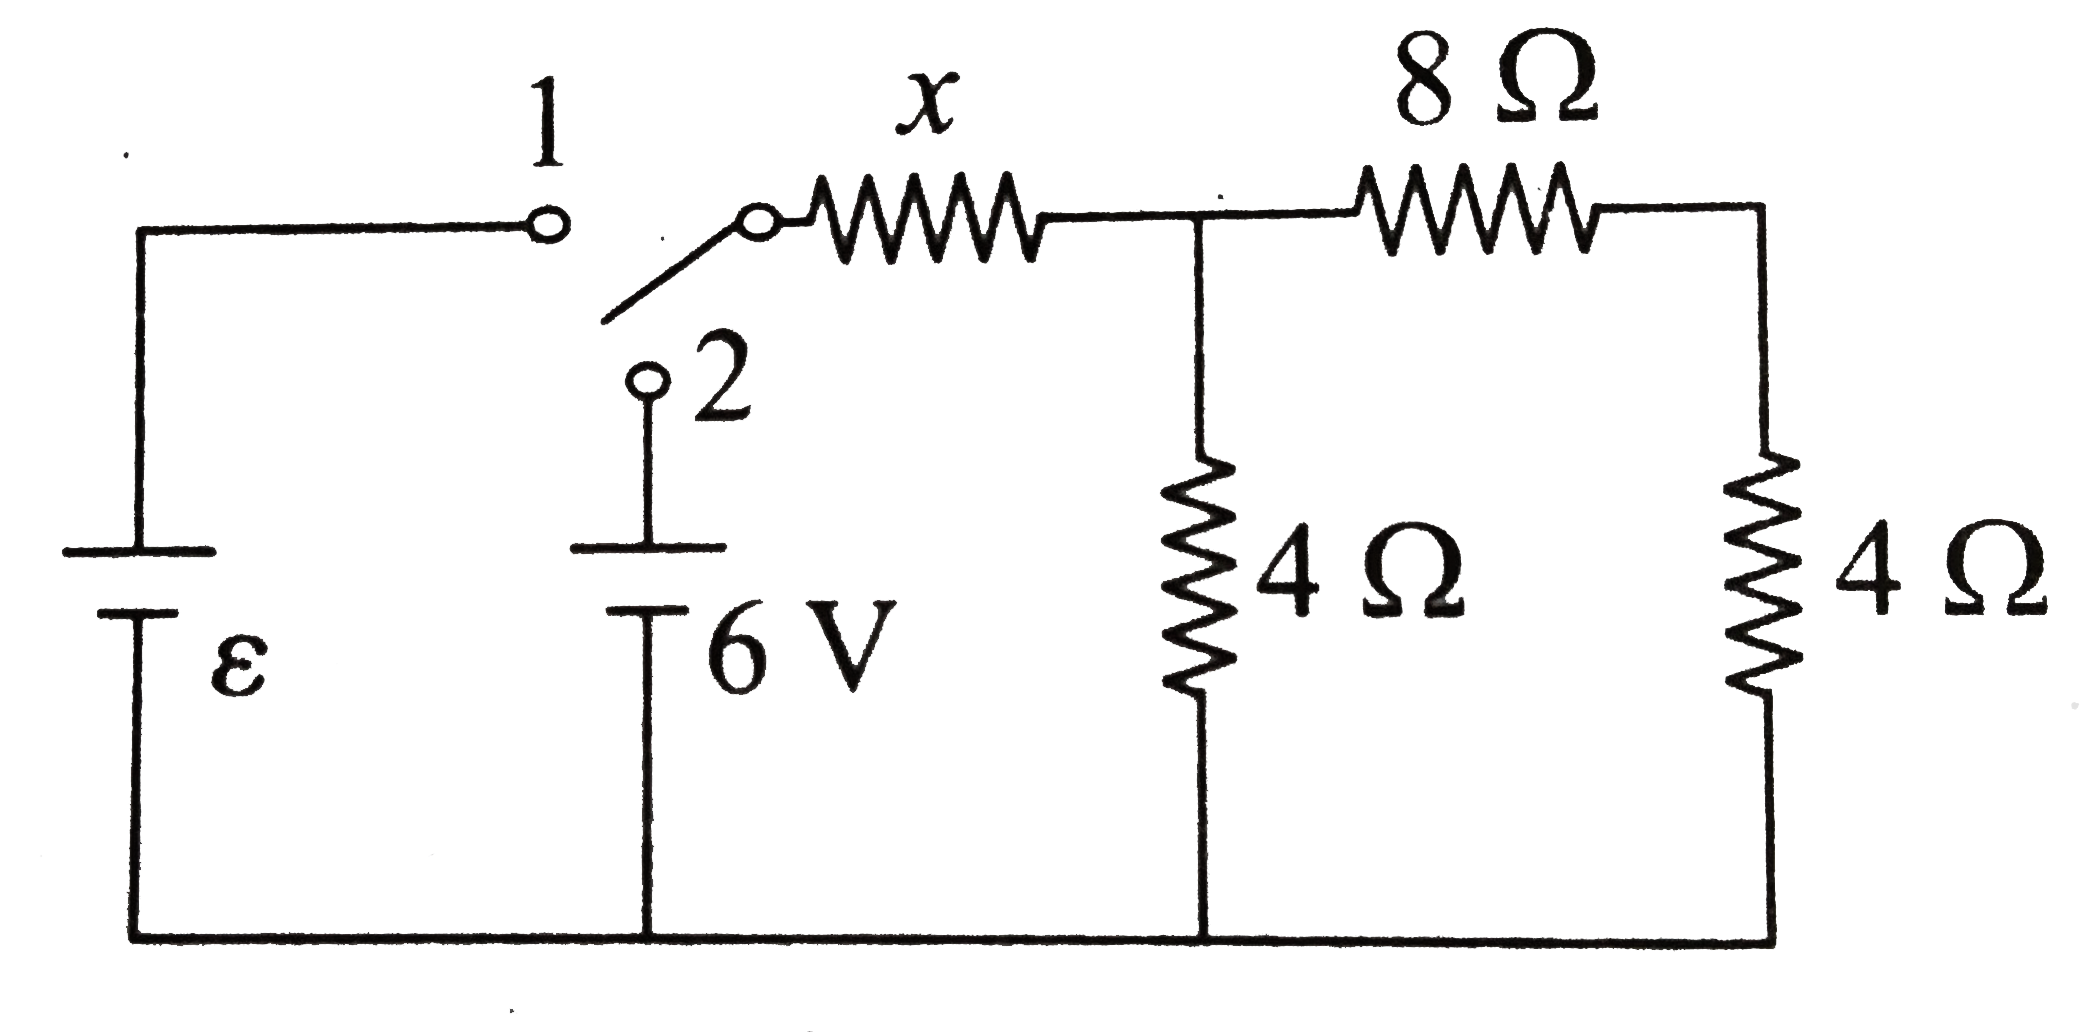 When the switch 1 is closed, the current through the 8 Omega resistance is 0.75A. When the switch 2 is closed (only), the current through the resistance marked x is 1 A. The value of E is